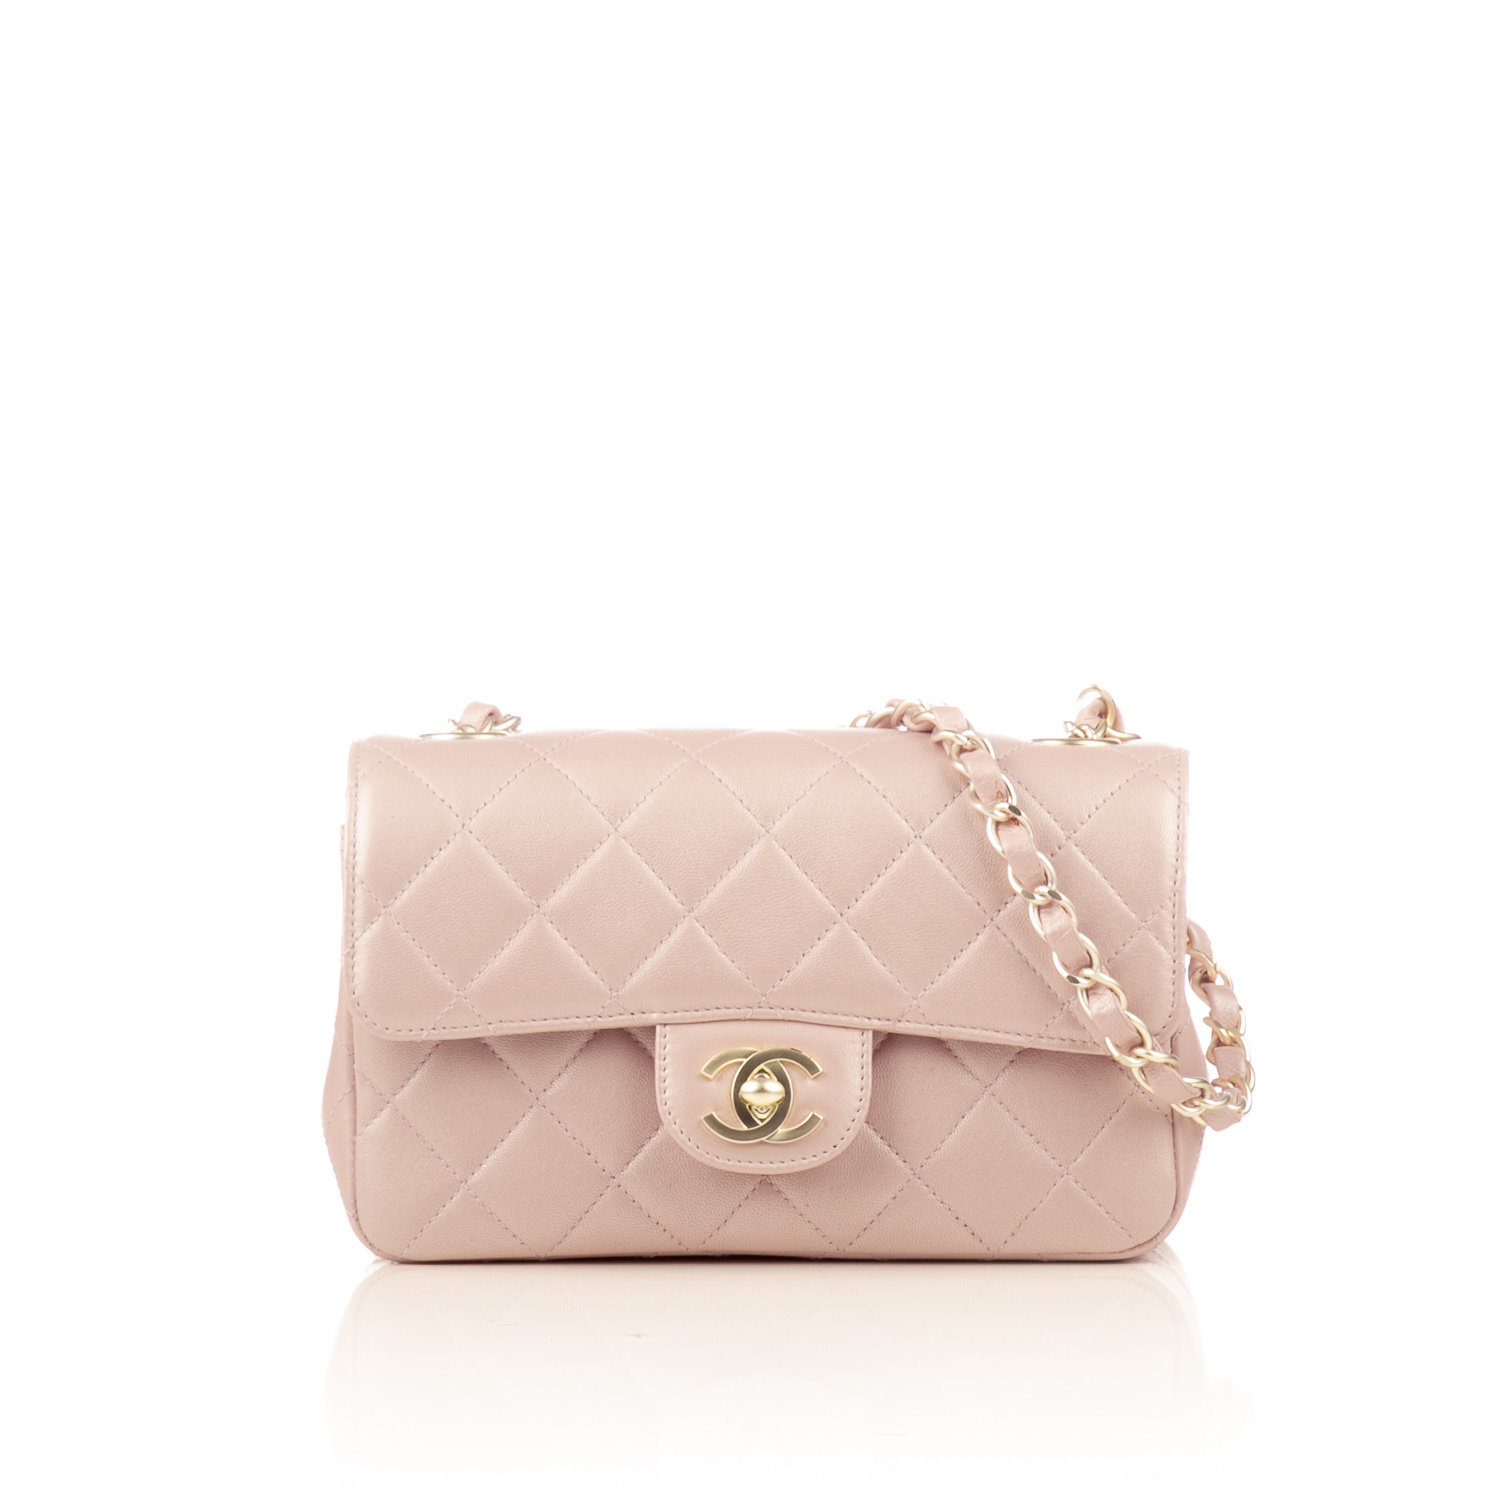 Chanel Mini Flap Bag With Top Handle Light Pink in Lambskin Leather  US